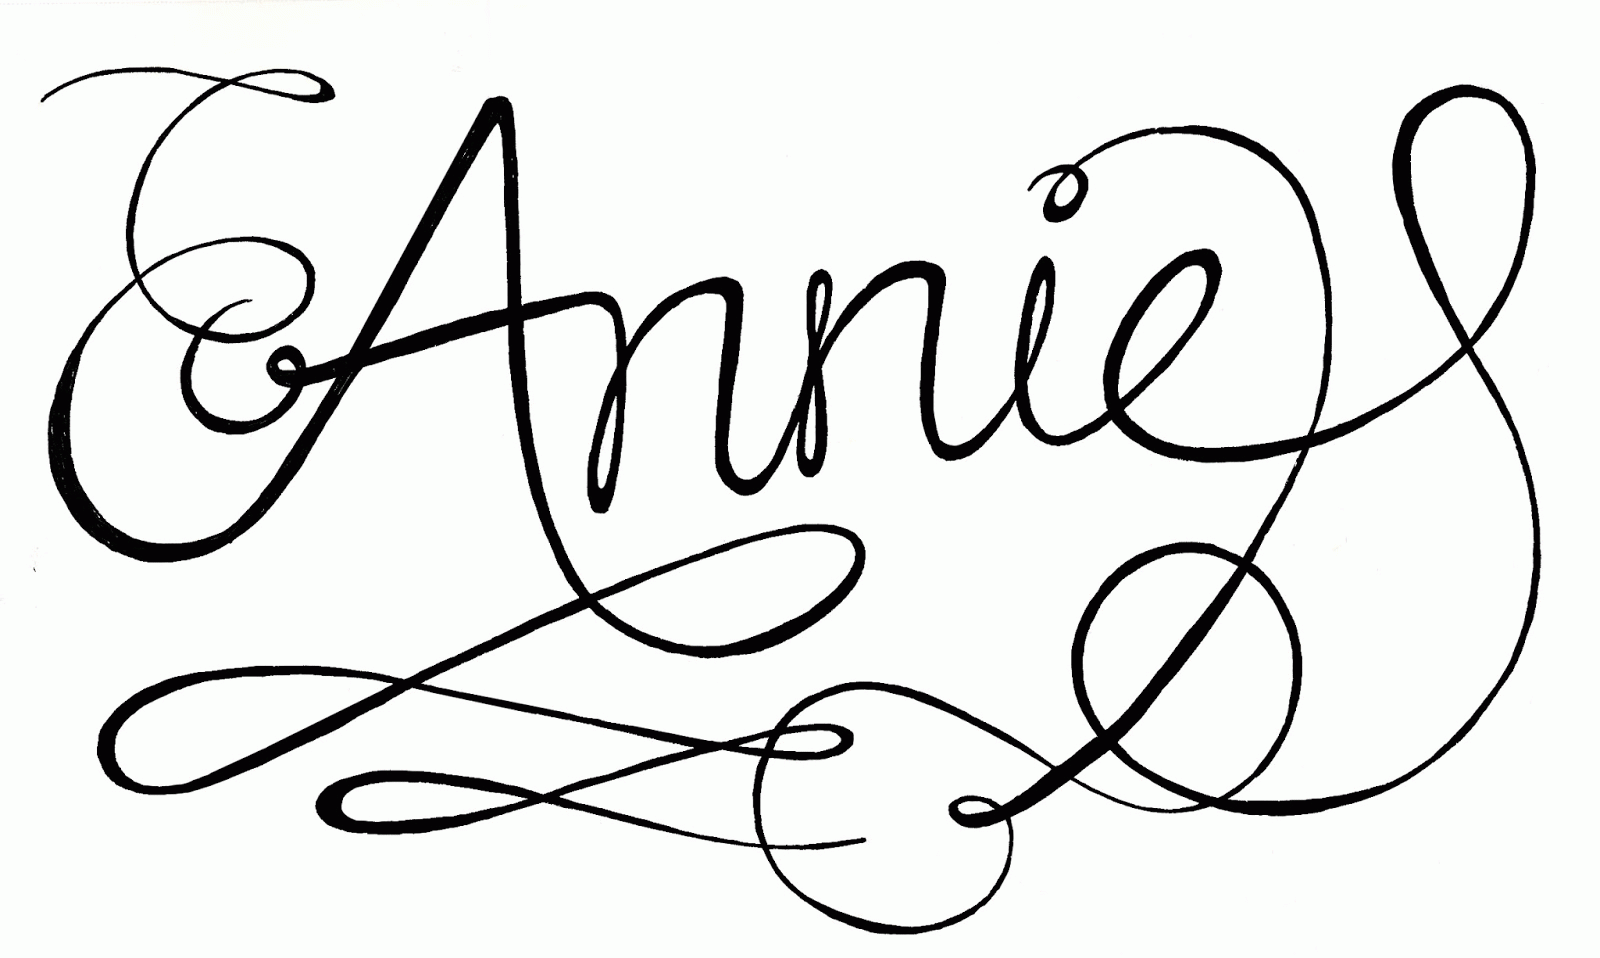 Little Orphan Annie Coloring Pages - Coloring Home